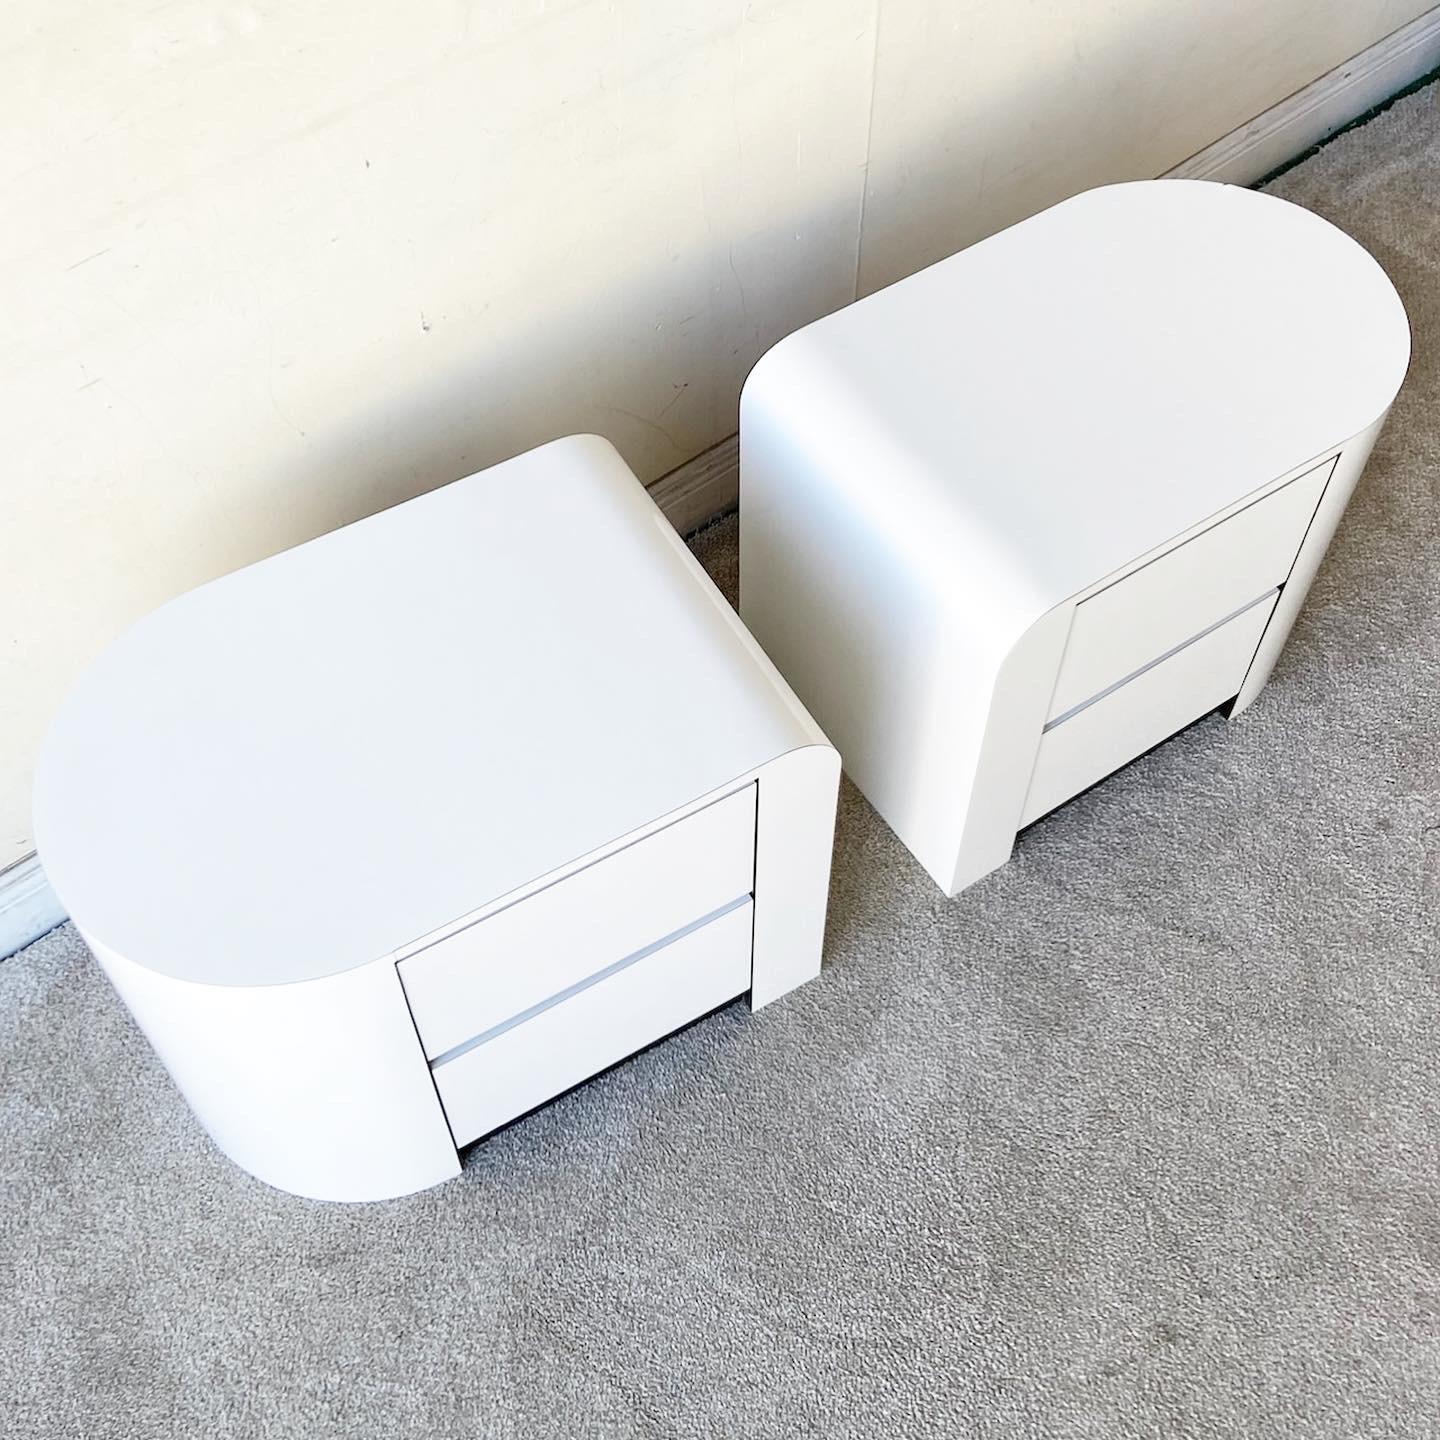 Post-Modern 1980s Postmodern White and Black Lacquer Laminate Nightstands - a Pair